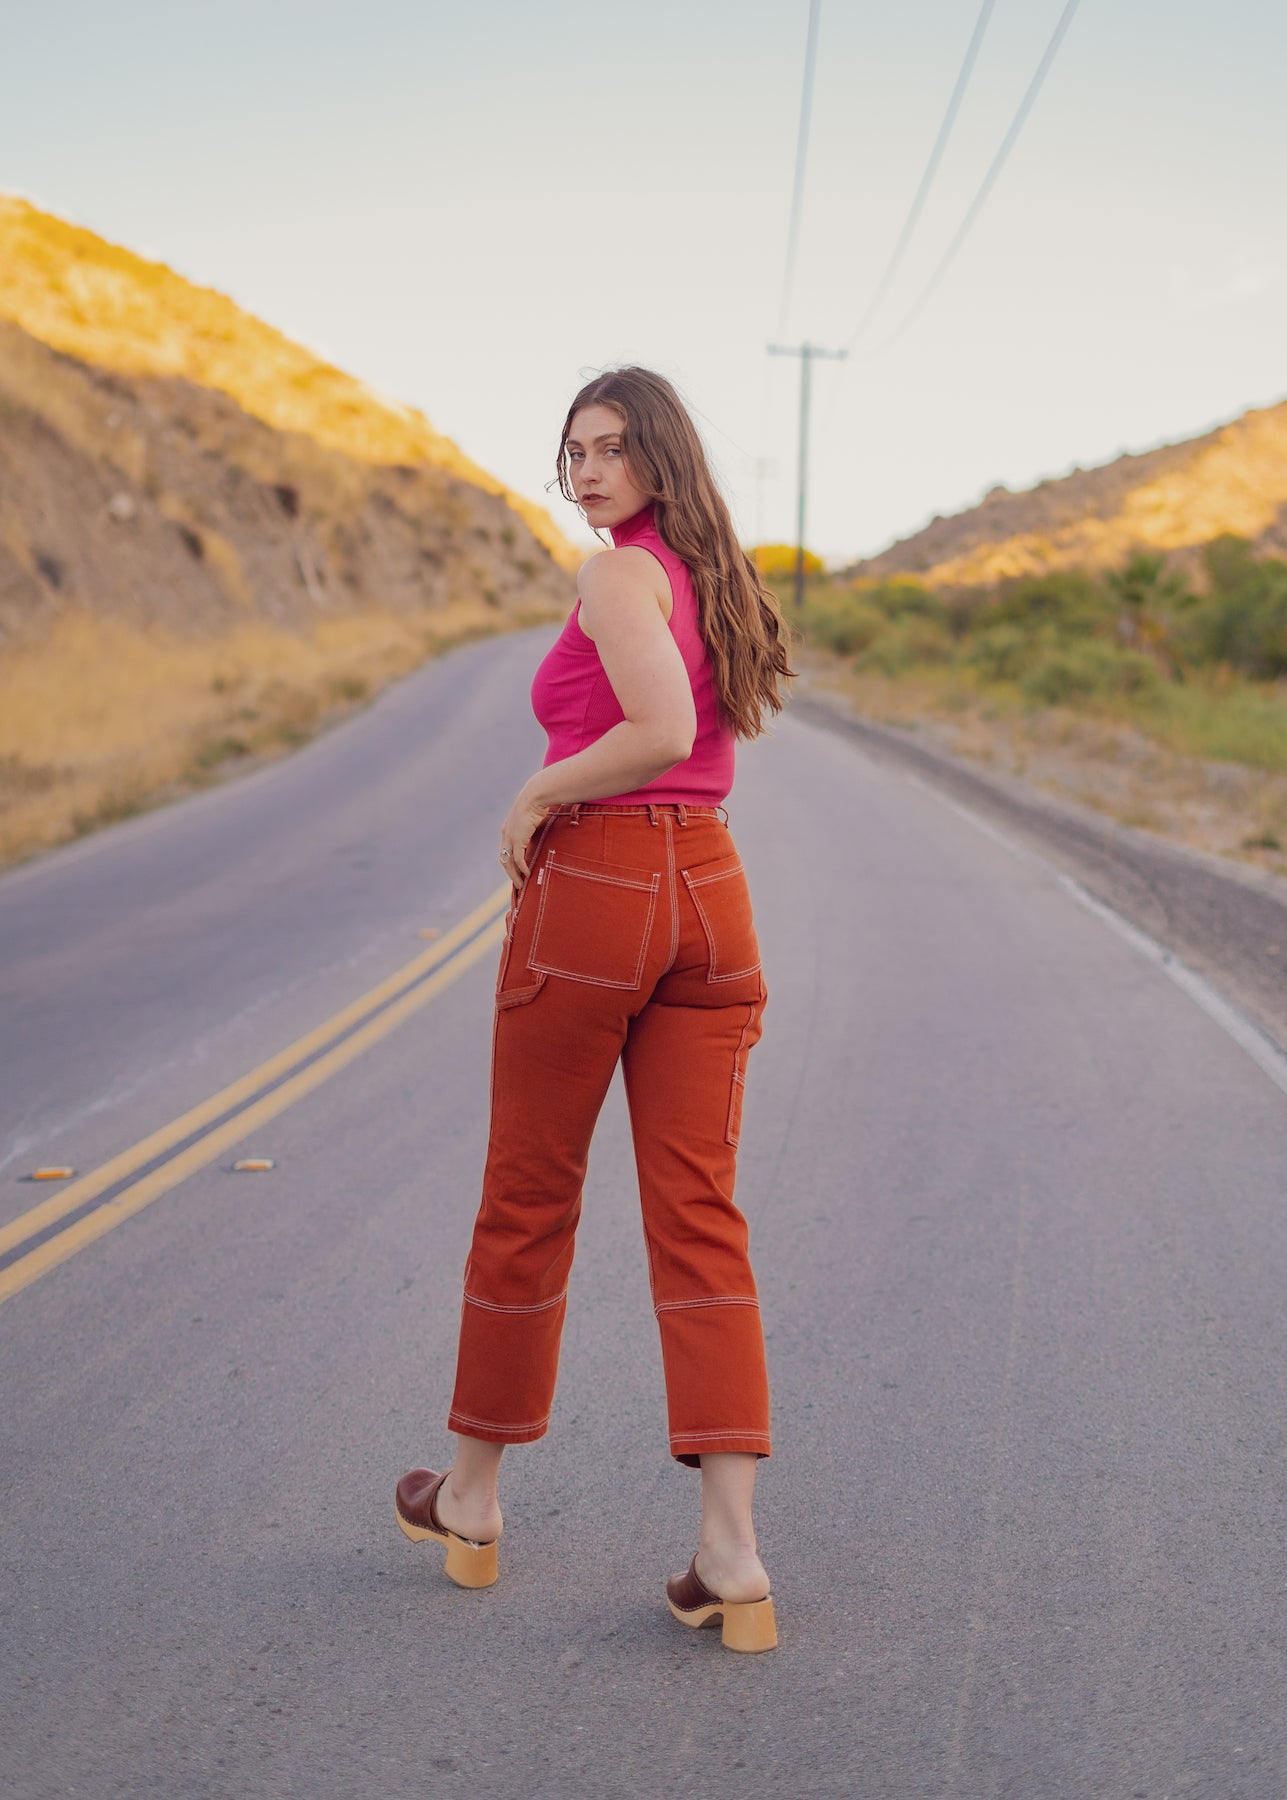 Allison is wearing Carpenter Jeans in Burnt Terracotta and Sleeveless Turtleneck in Hot Pink